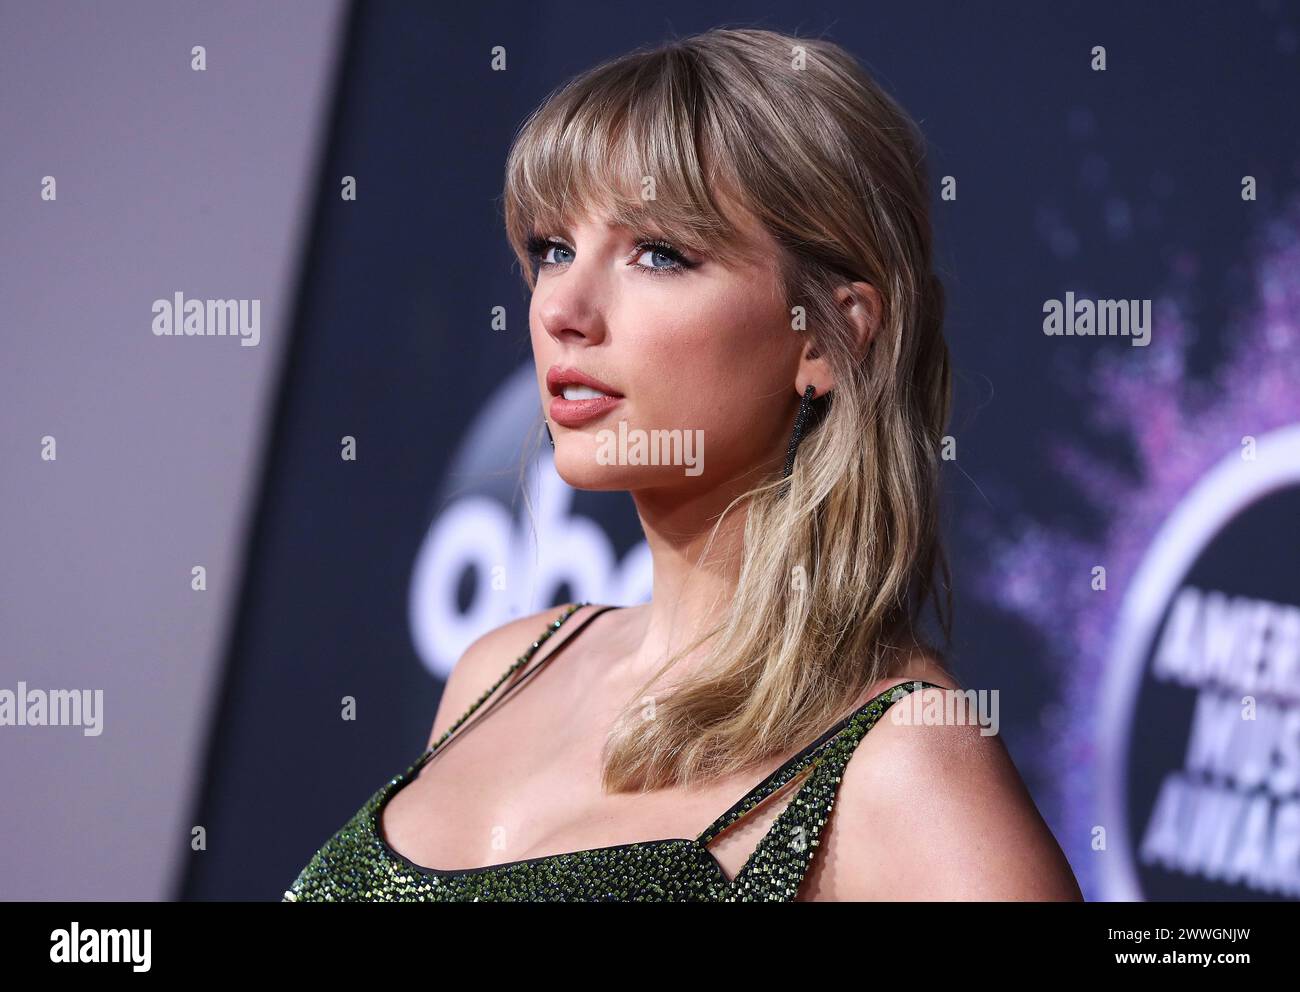 (FILE) ‘Taylor Swift: The Eras Tour' Breaks Disney+ Record as No. 1 Most-Streamed Music Film. LOS ANGELES, CALIFORNIA, USA - NOVEMBER 24: Singer Taylor Swift wearing a Julien Macdonald dress, Casadei boots, and Ofira jewelry arrives at the 2019 American Music Awards held at Microsoft Theatre L.A. Live on November 24, 2019 in Los Angeles, California, United States. (Photo by Xavier Collin/Image Press Agency) Stock Photo